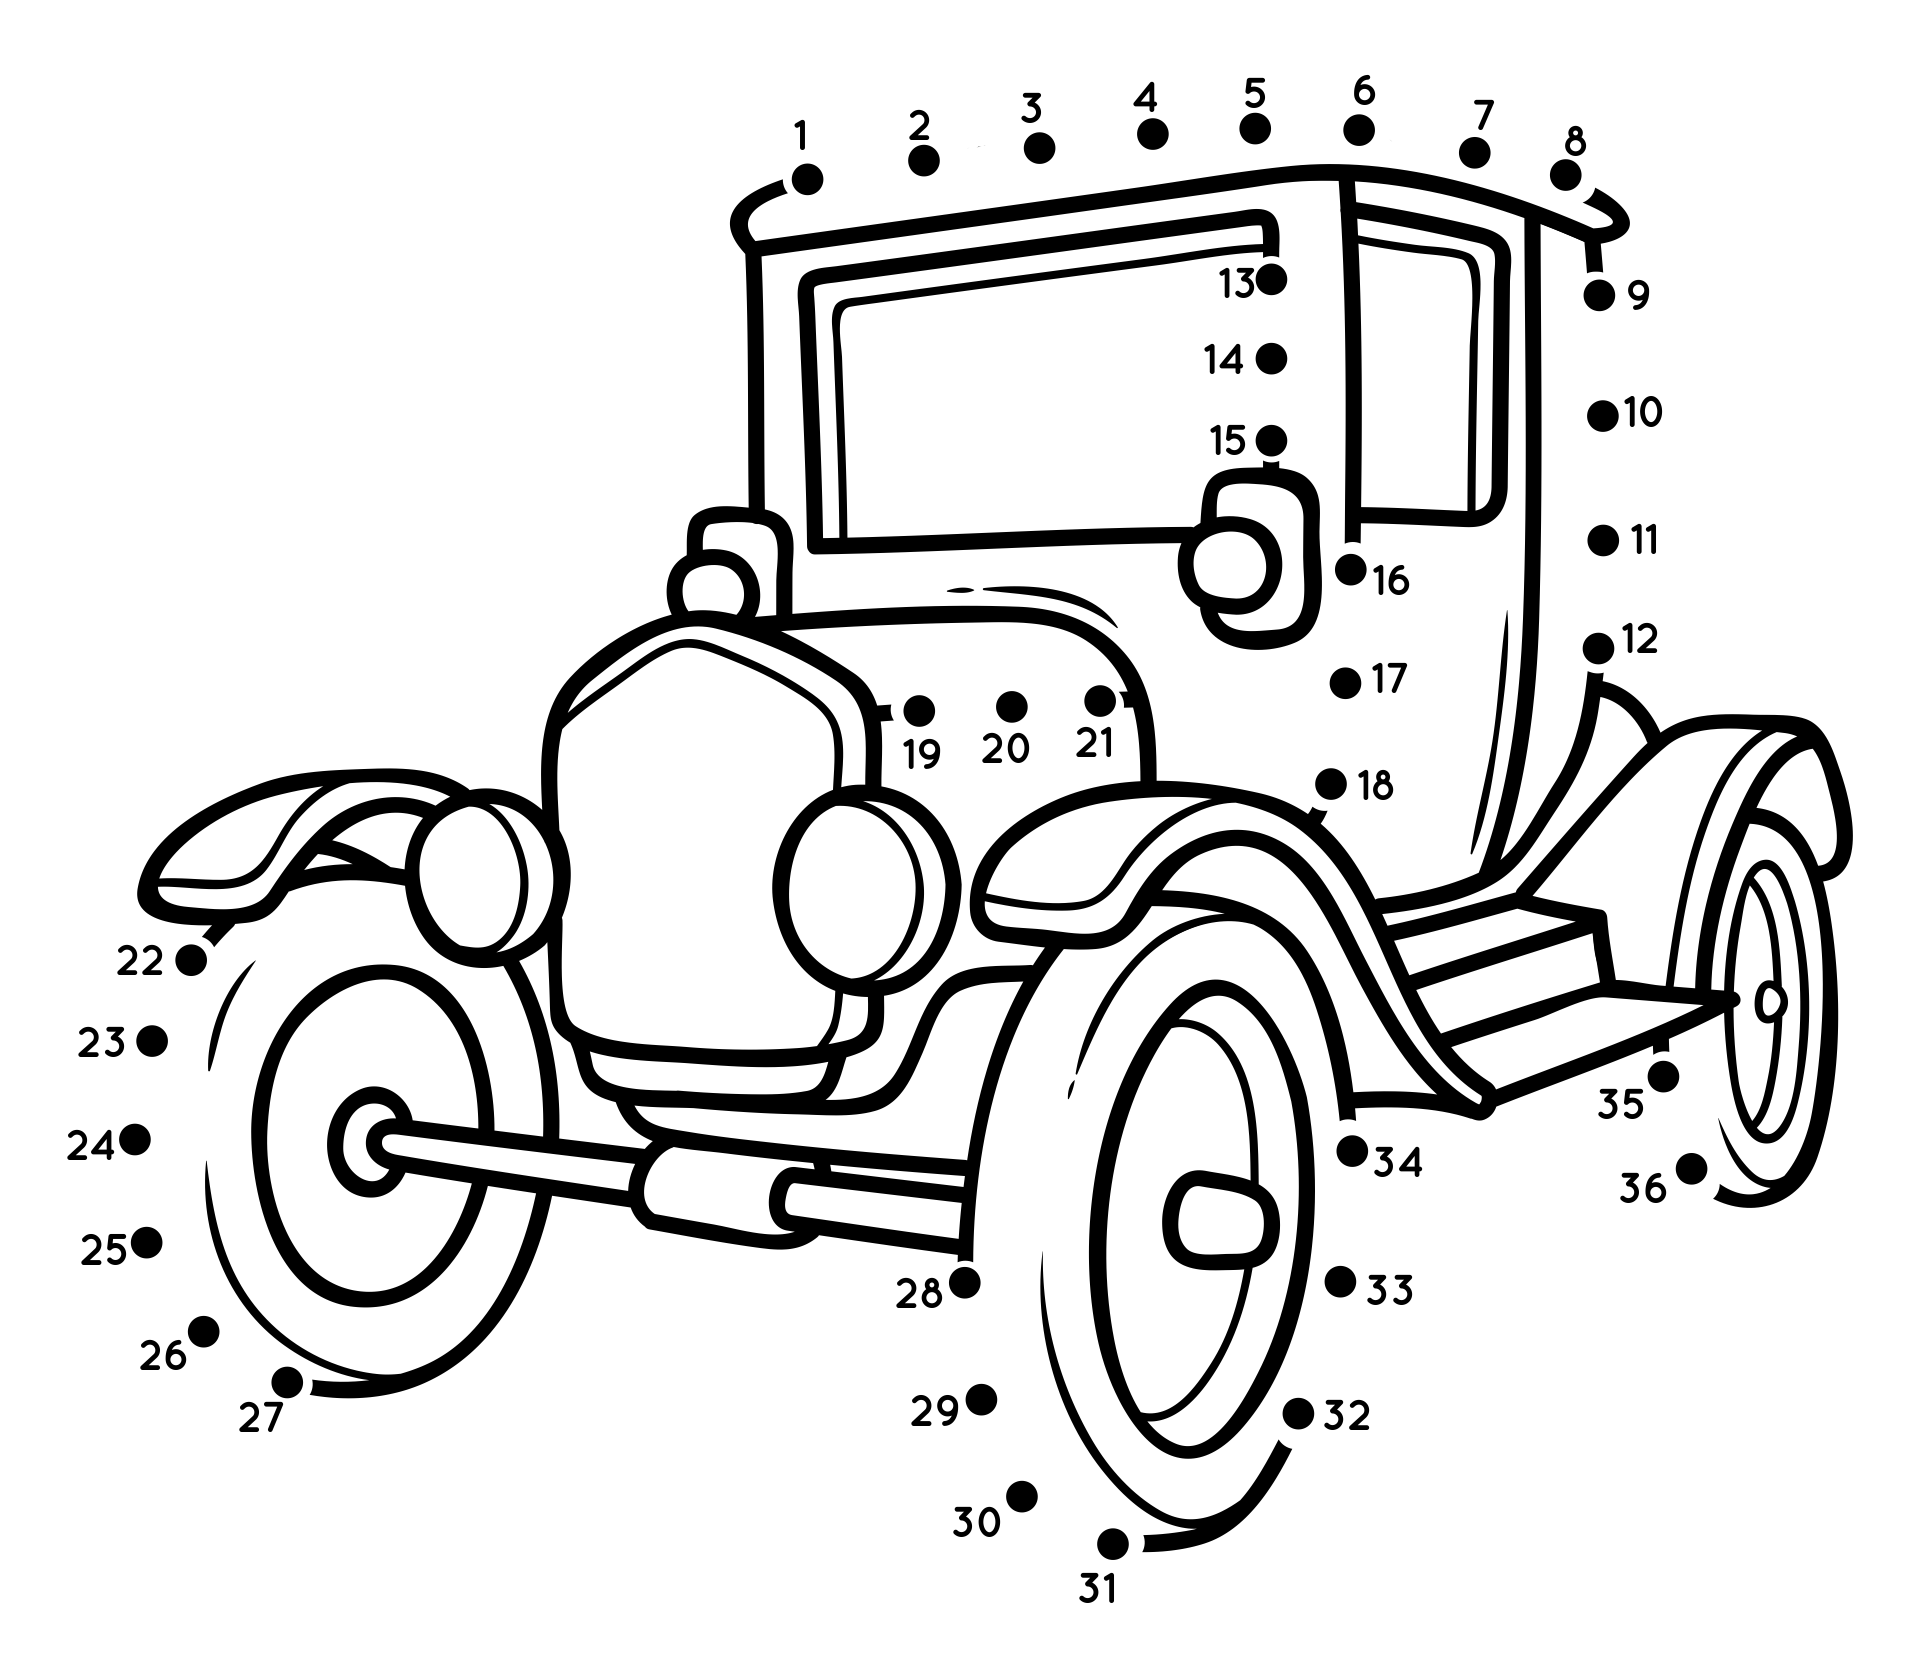 Car Connect the Dots Worksheets